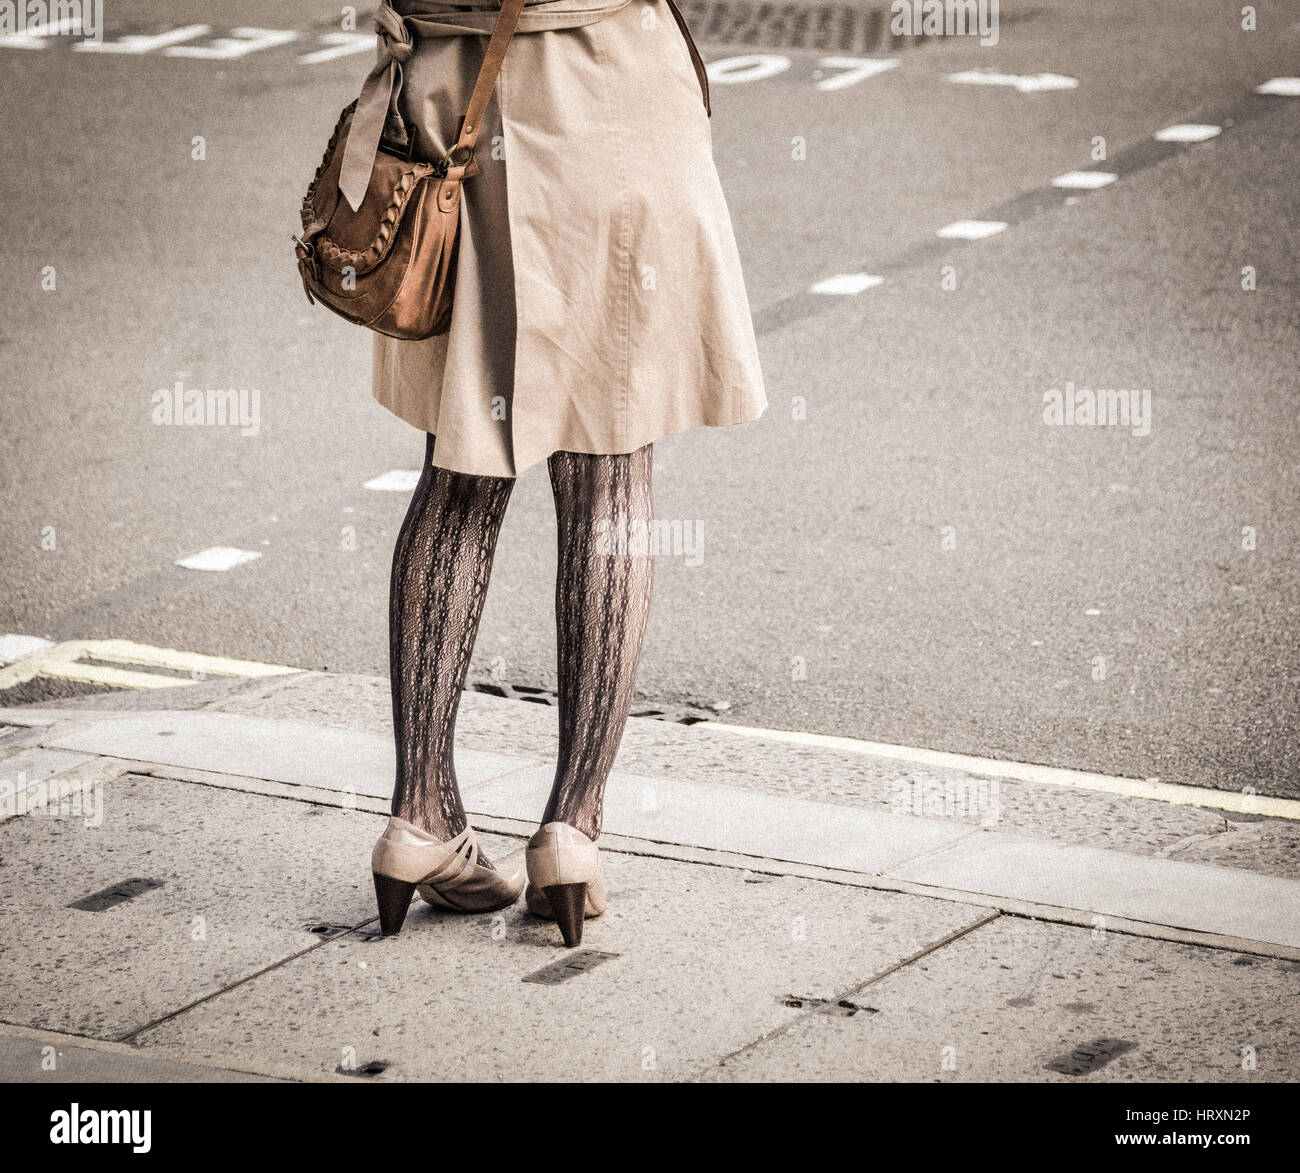 A girl in stockings crossing London street Stock Photo